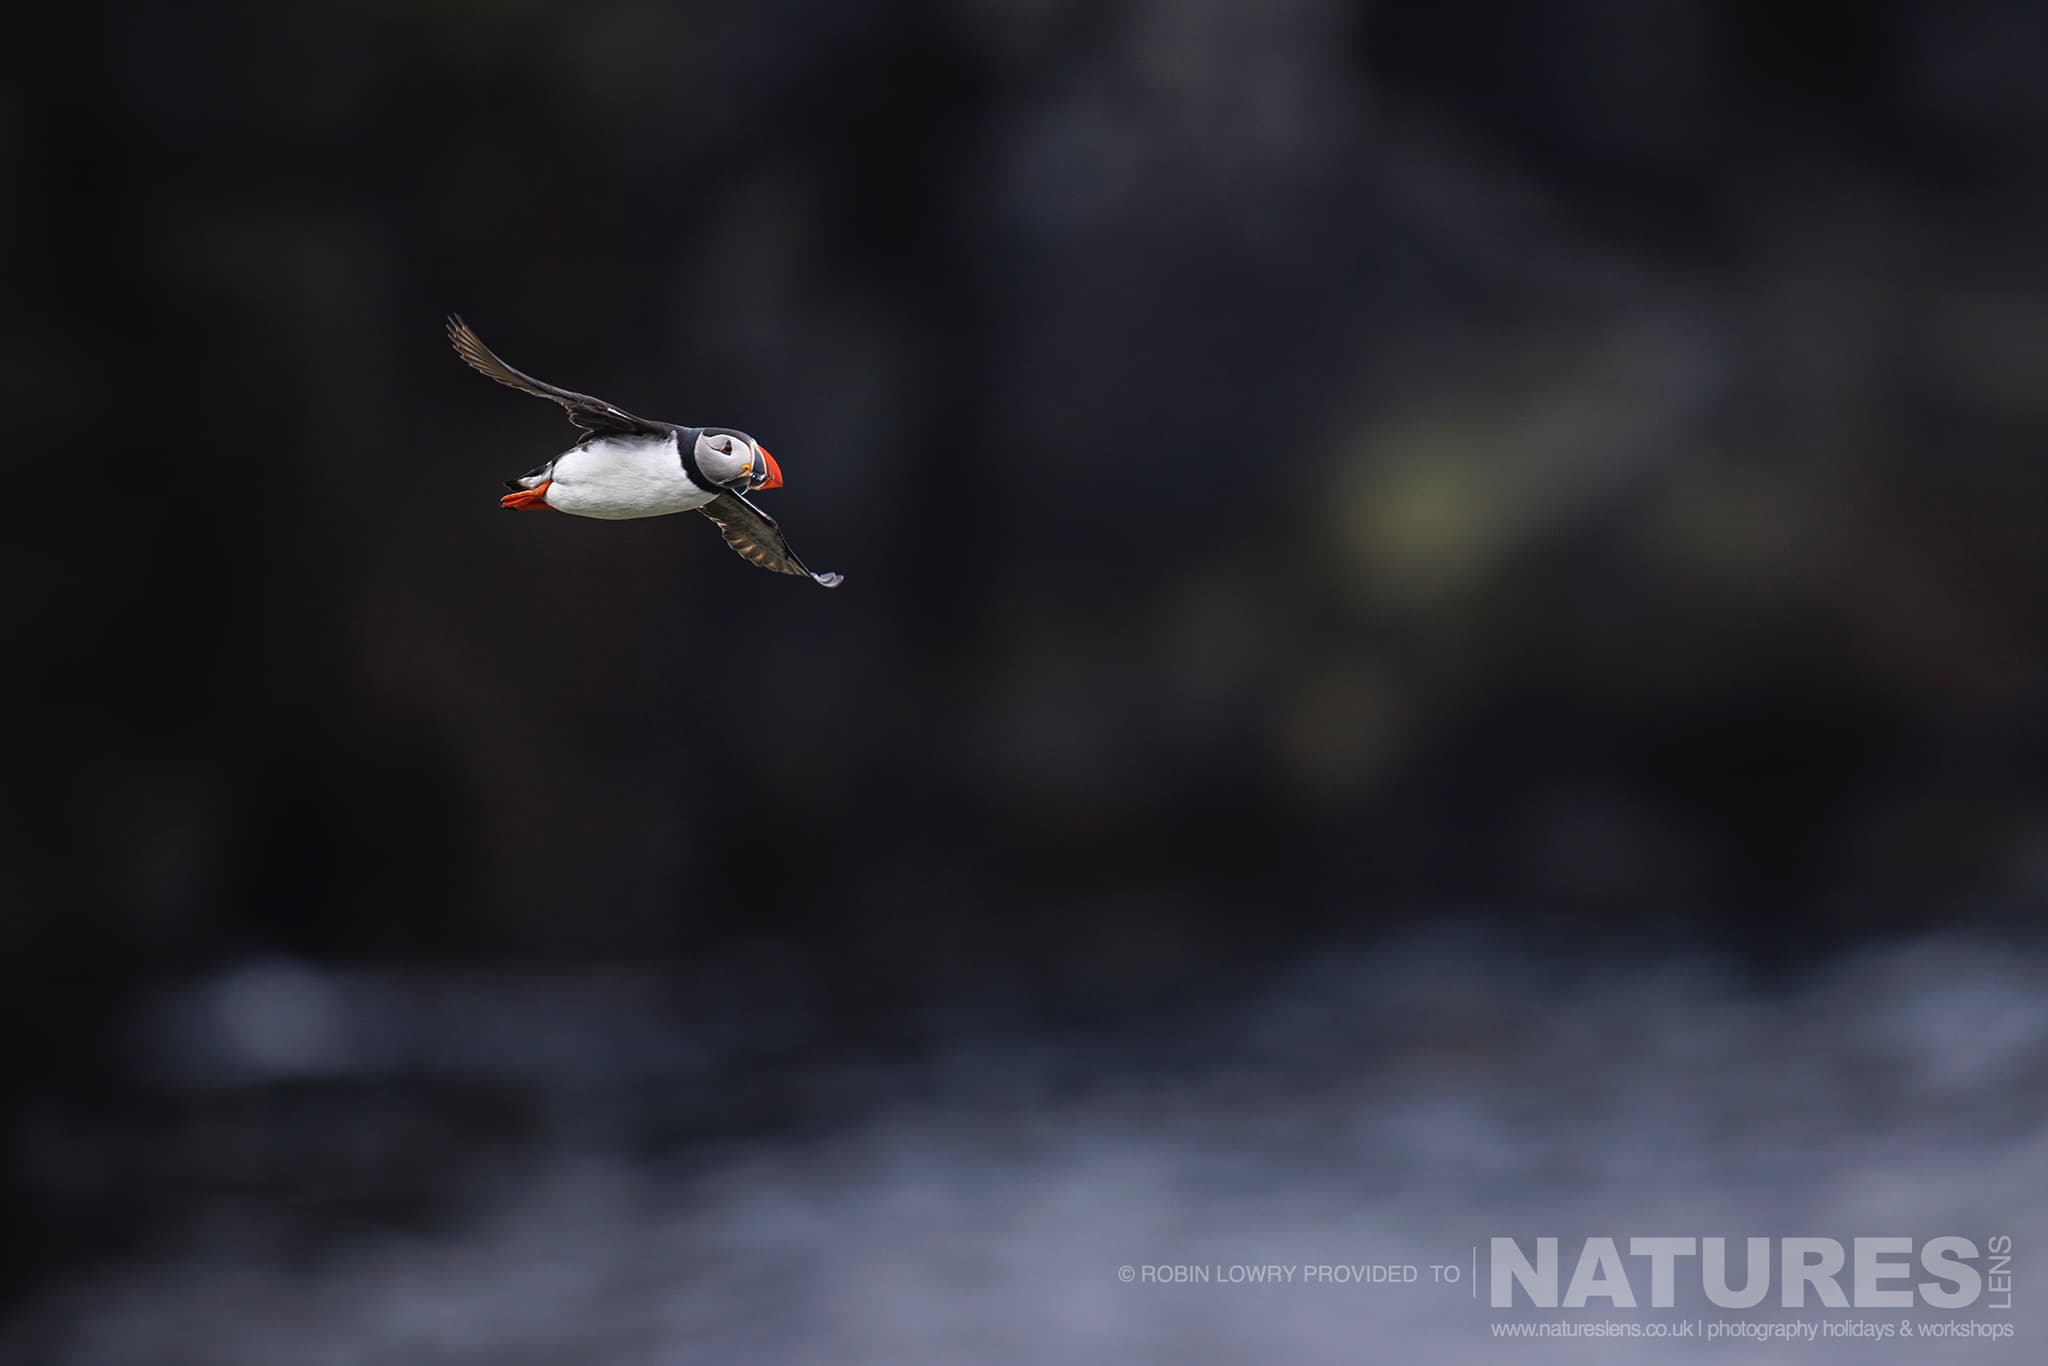 A Lone Atlantic Puffin In Flight, Photographed In It'S Natural Habitat On Grímsey Island, Iceland